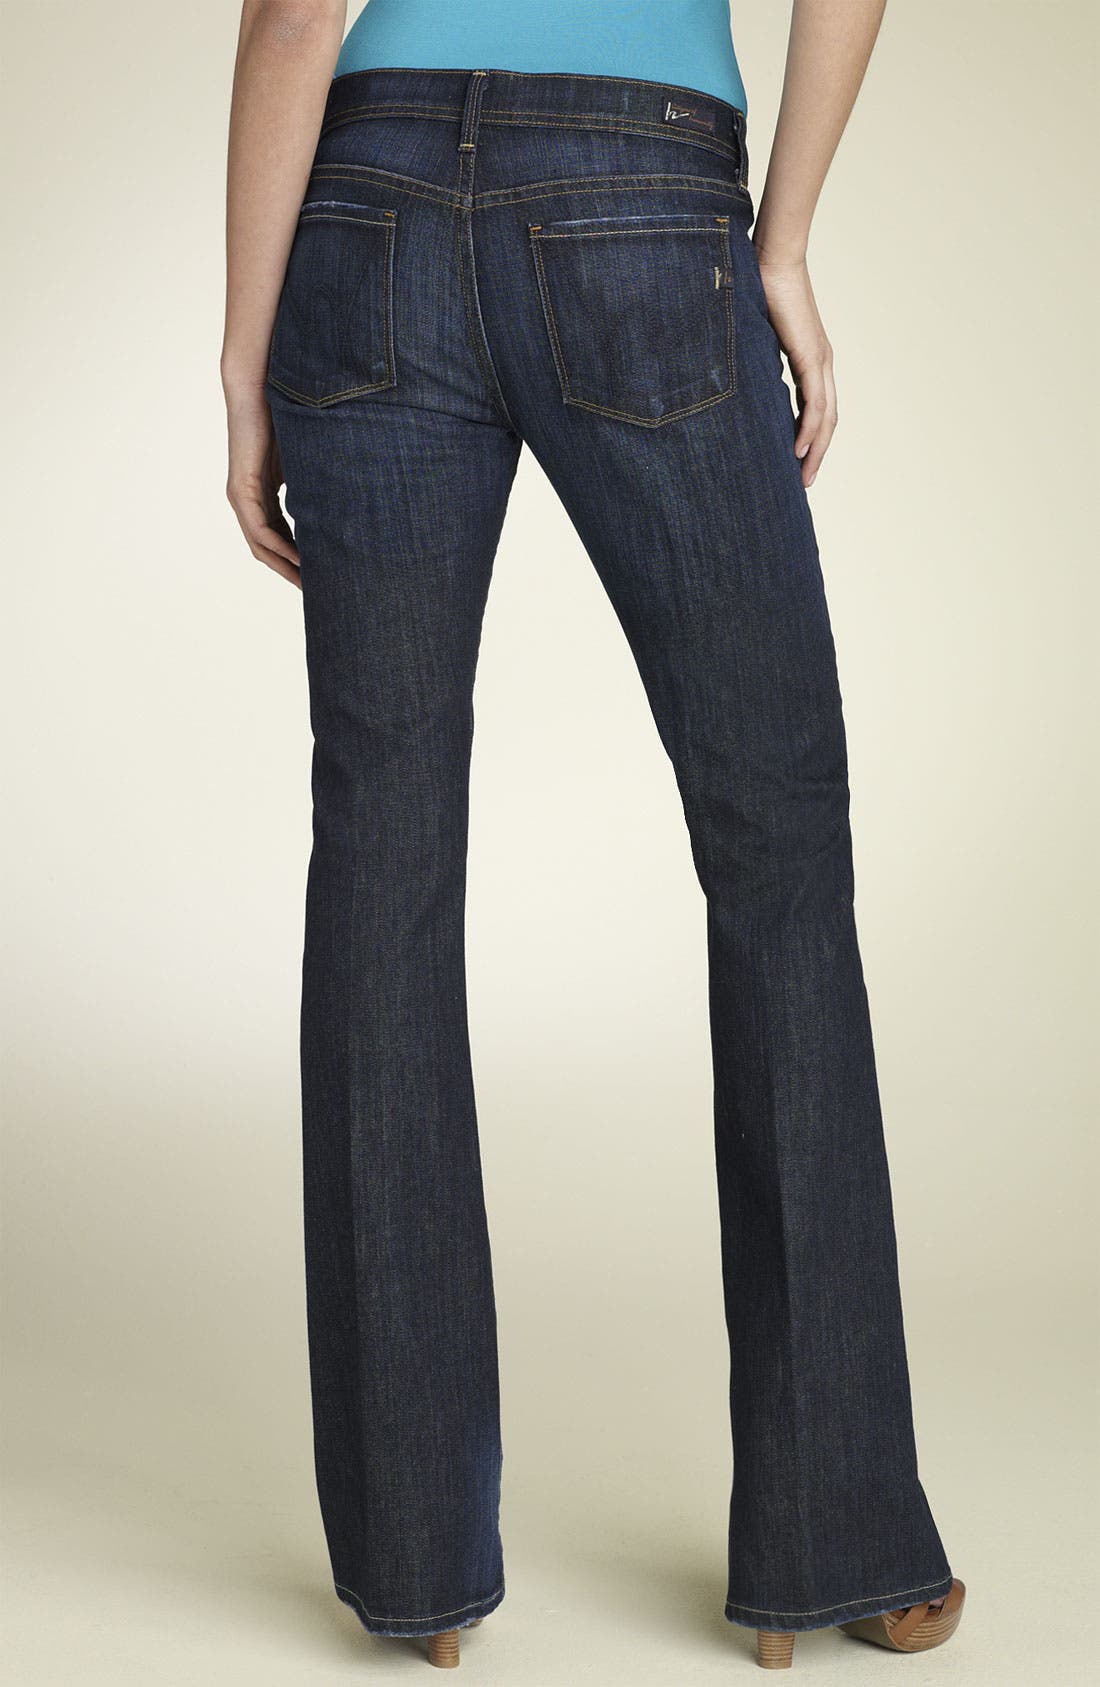 citizens of humanity jeans ingrid 002